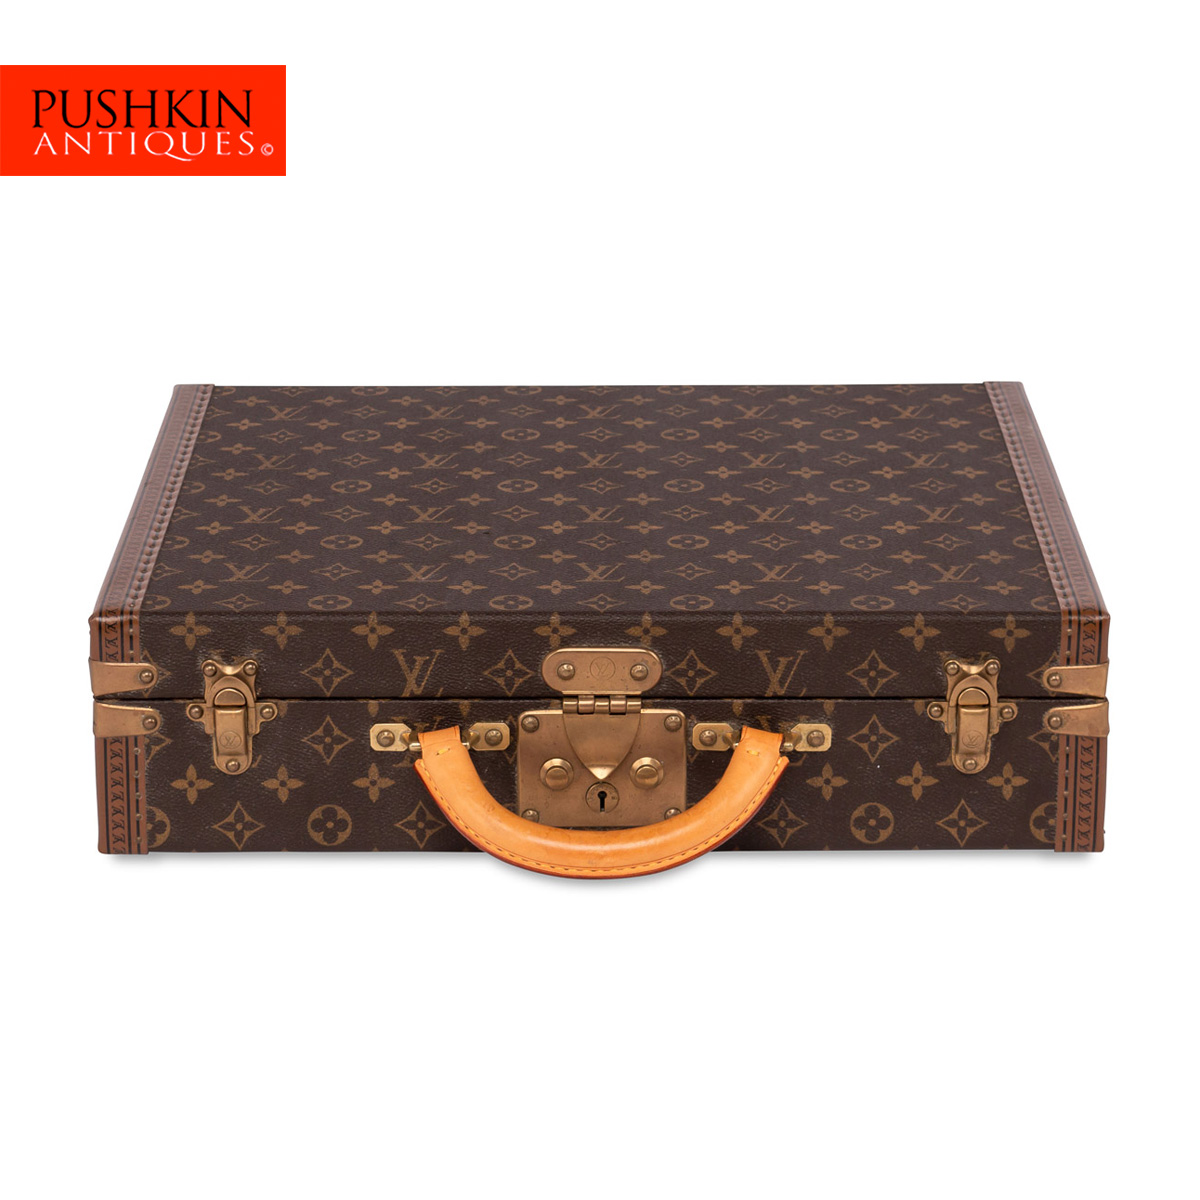 LATE 20thC LOUIS VUITTON CUSTOM FITTED WATCH CASE c.1980 — Pushkin Antiques